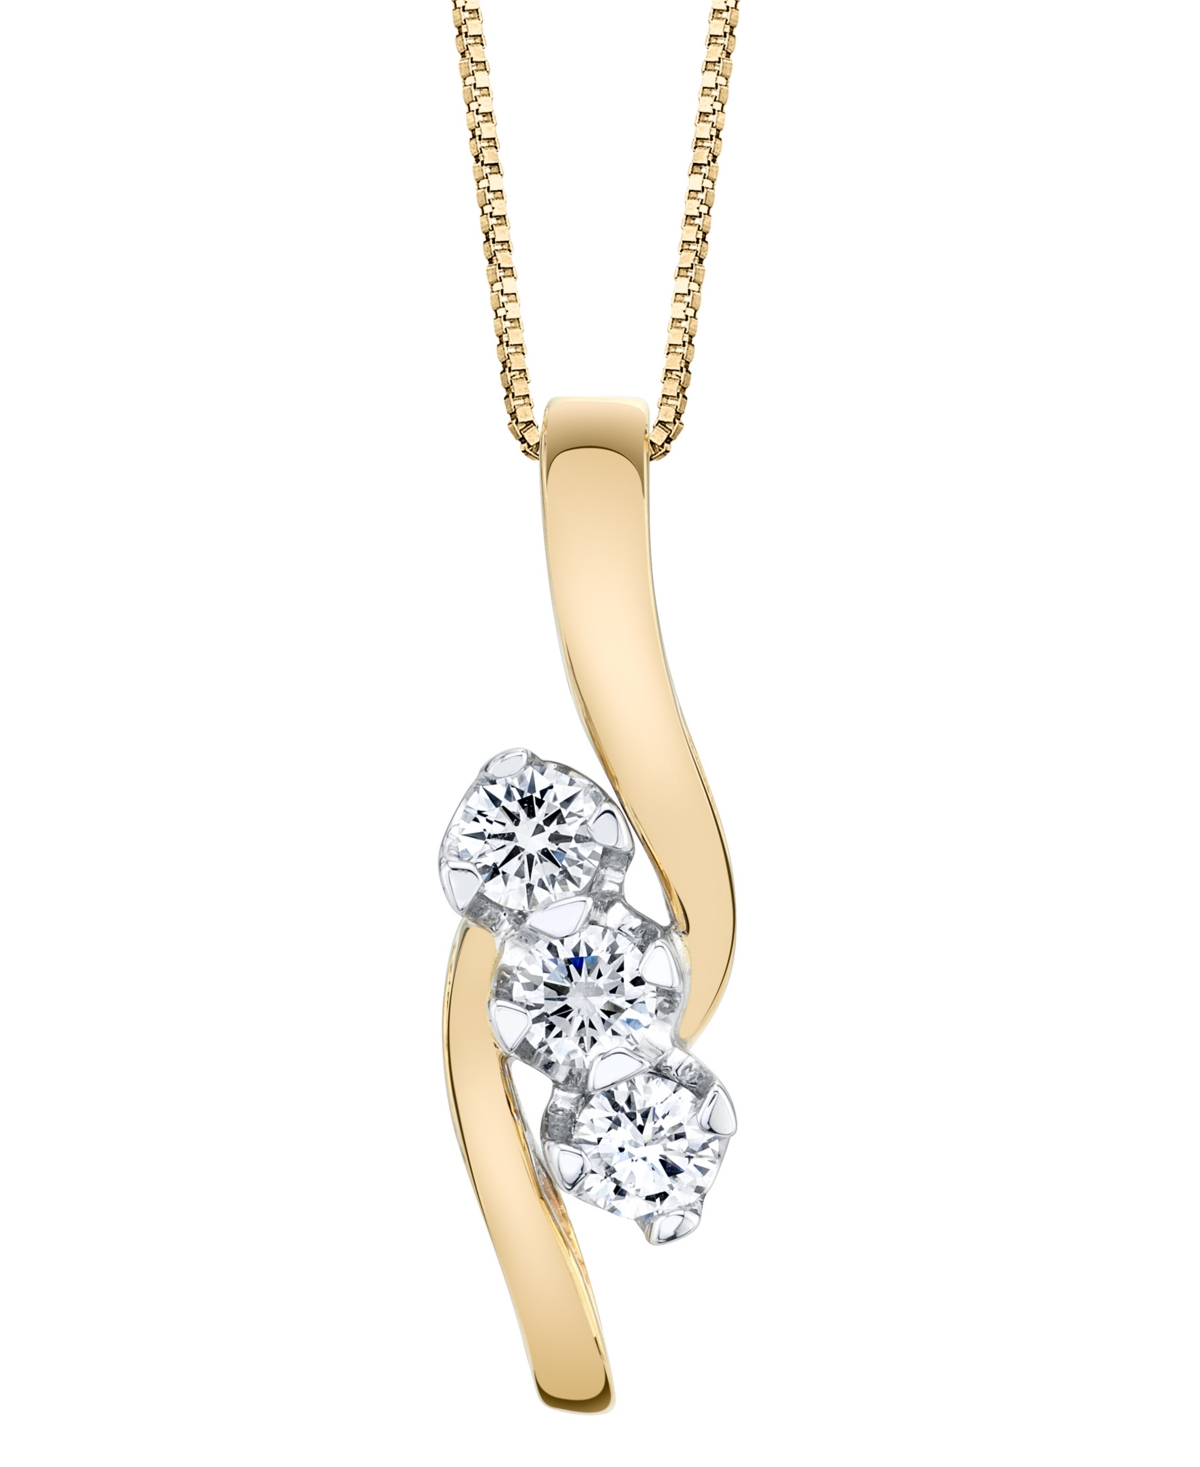 Diamond (3/8 ct. t.w.) Pendant in 14k Yellow and White Gold